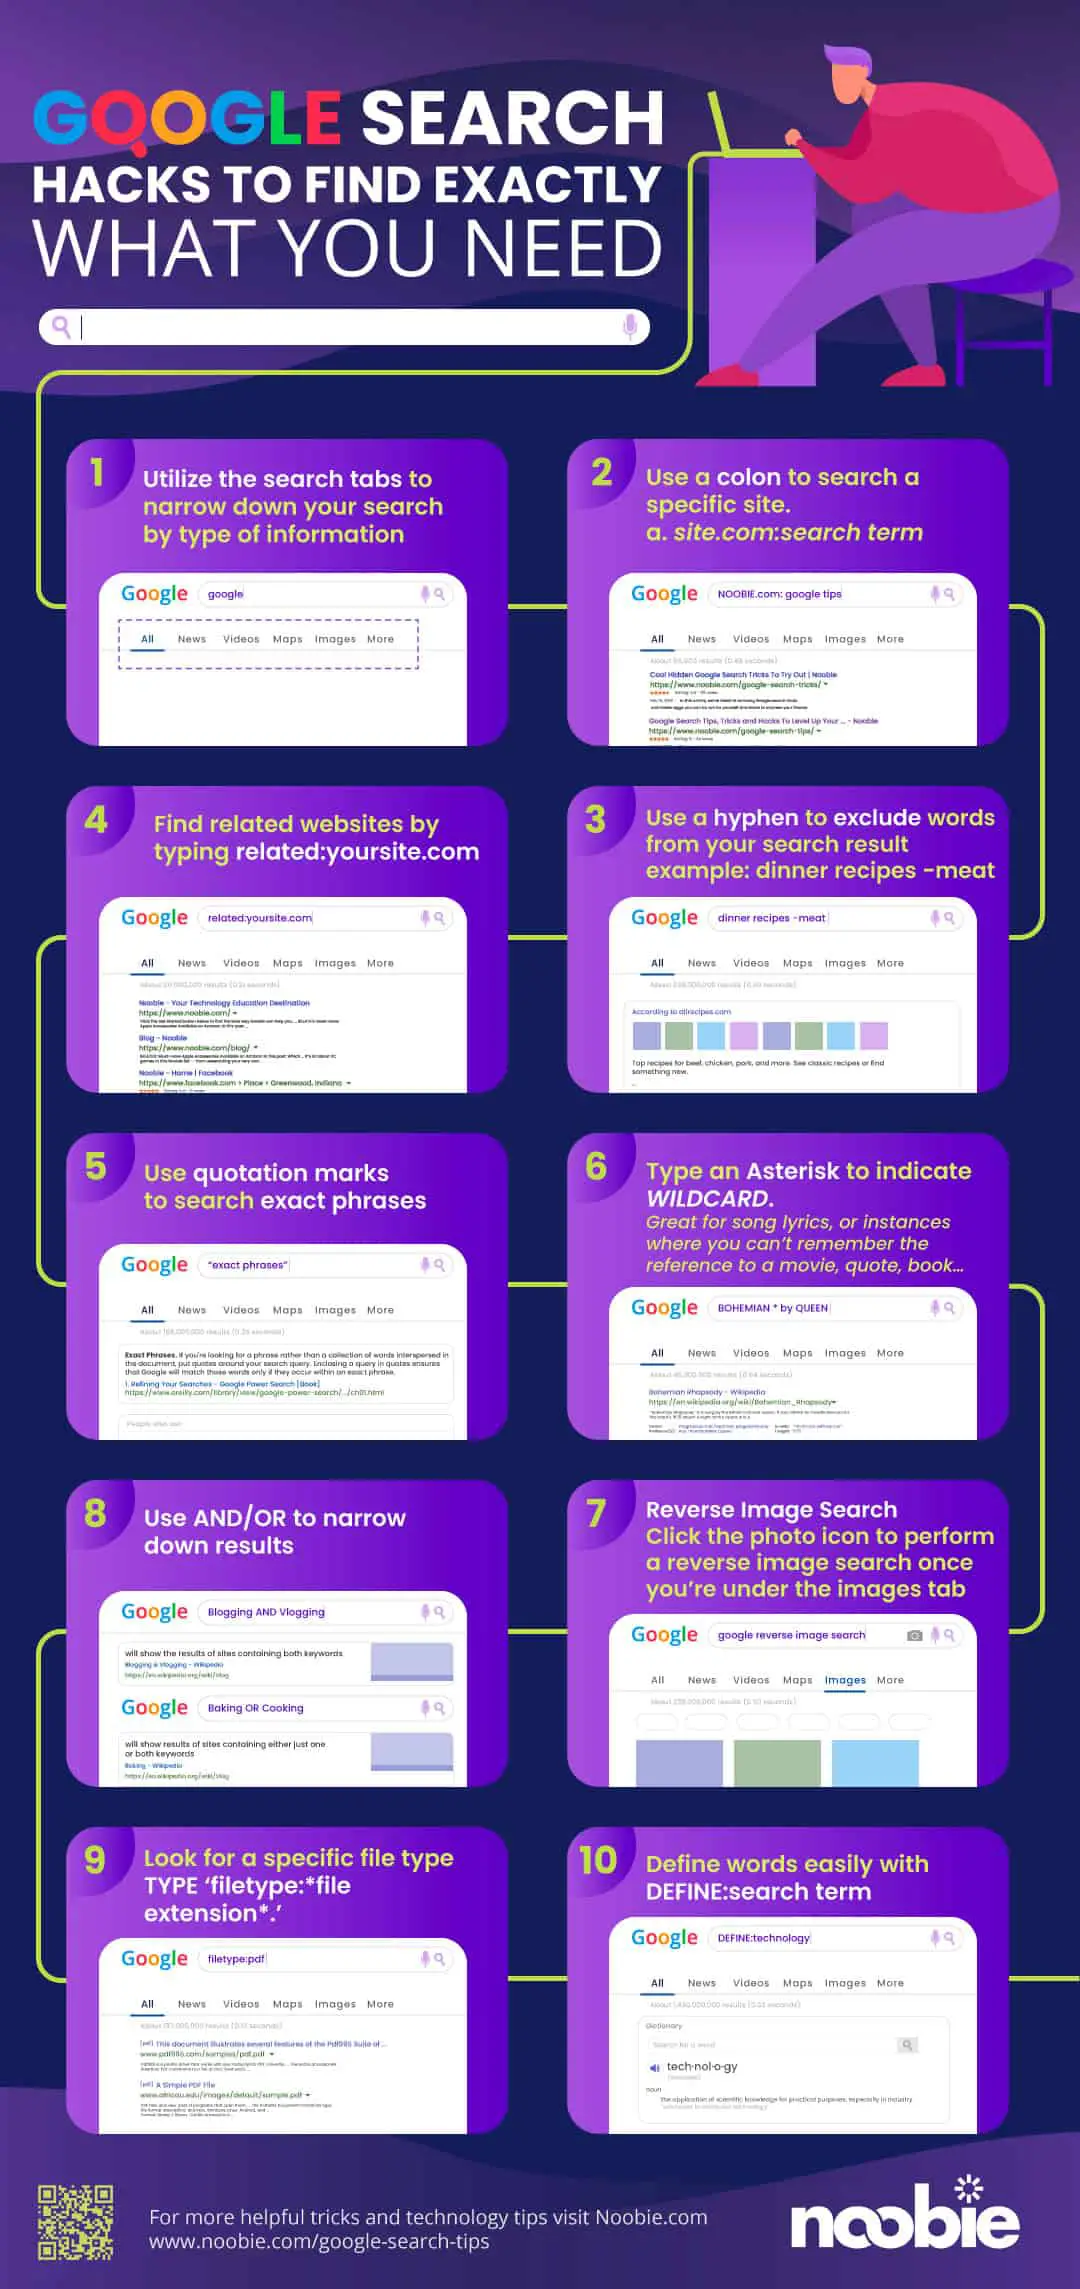 Google Search Tips, Tricks and Hacks To Level Up Your Internet Experience [INFOGRAPHIC]